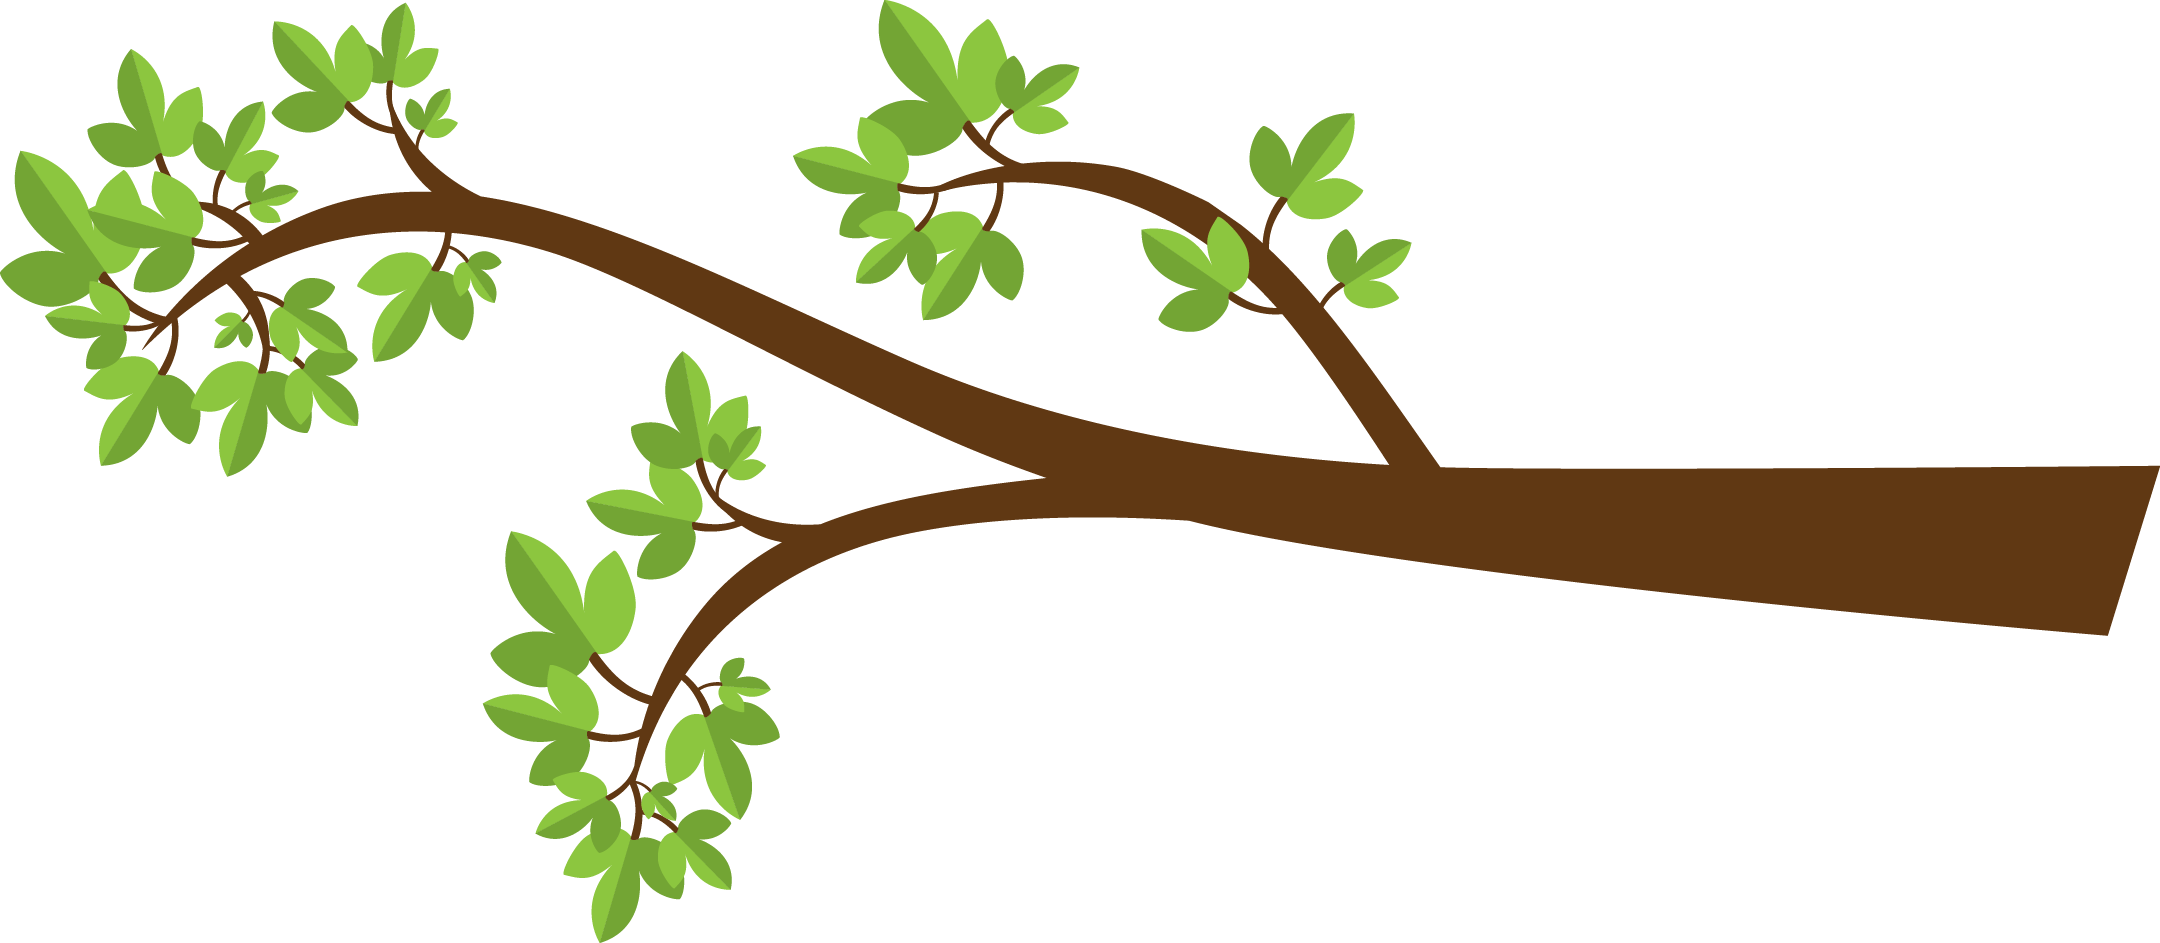 Tree branch clipart, Green le